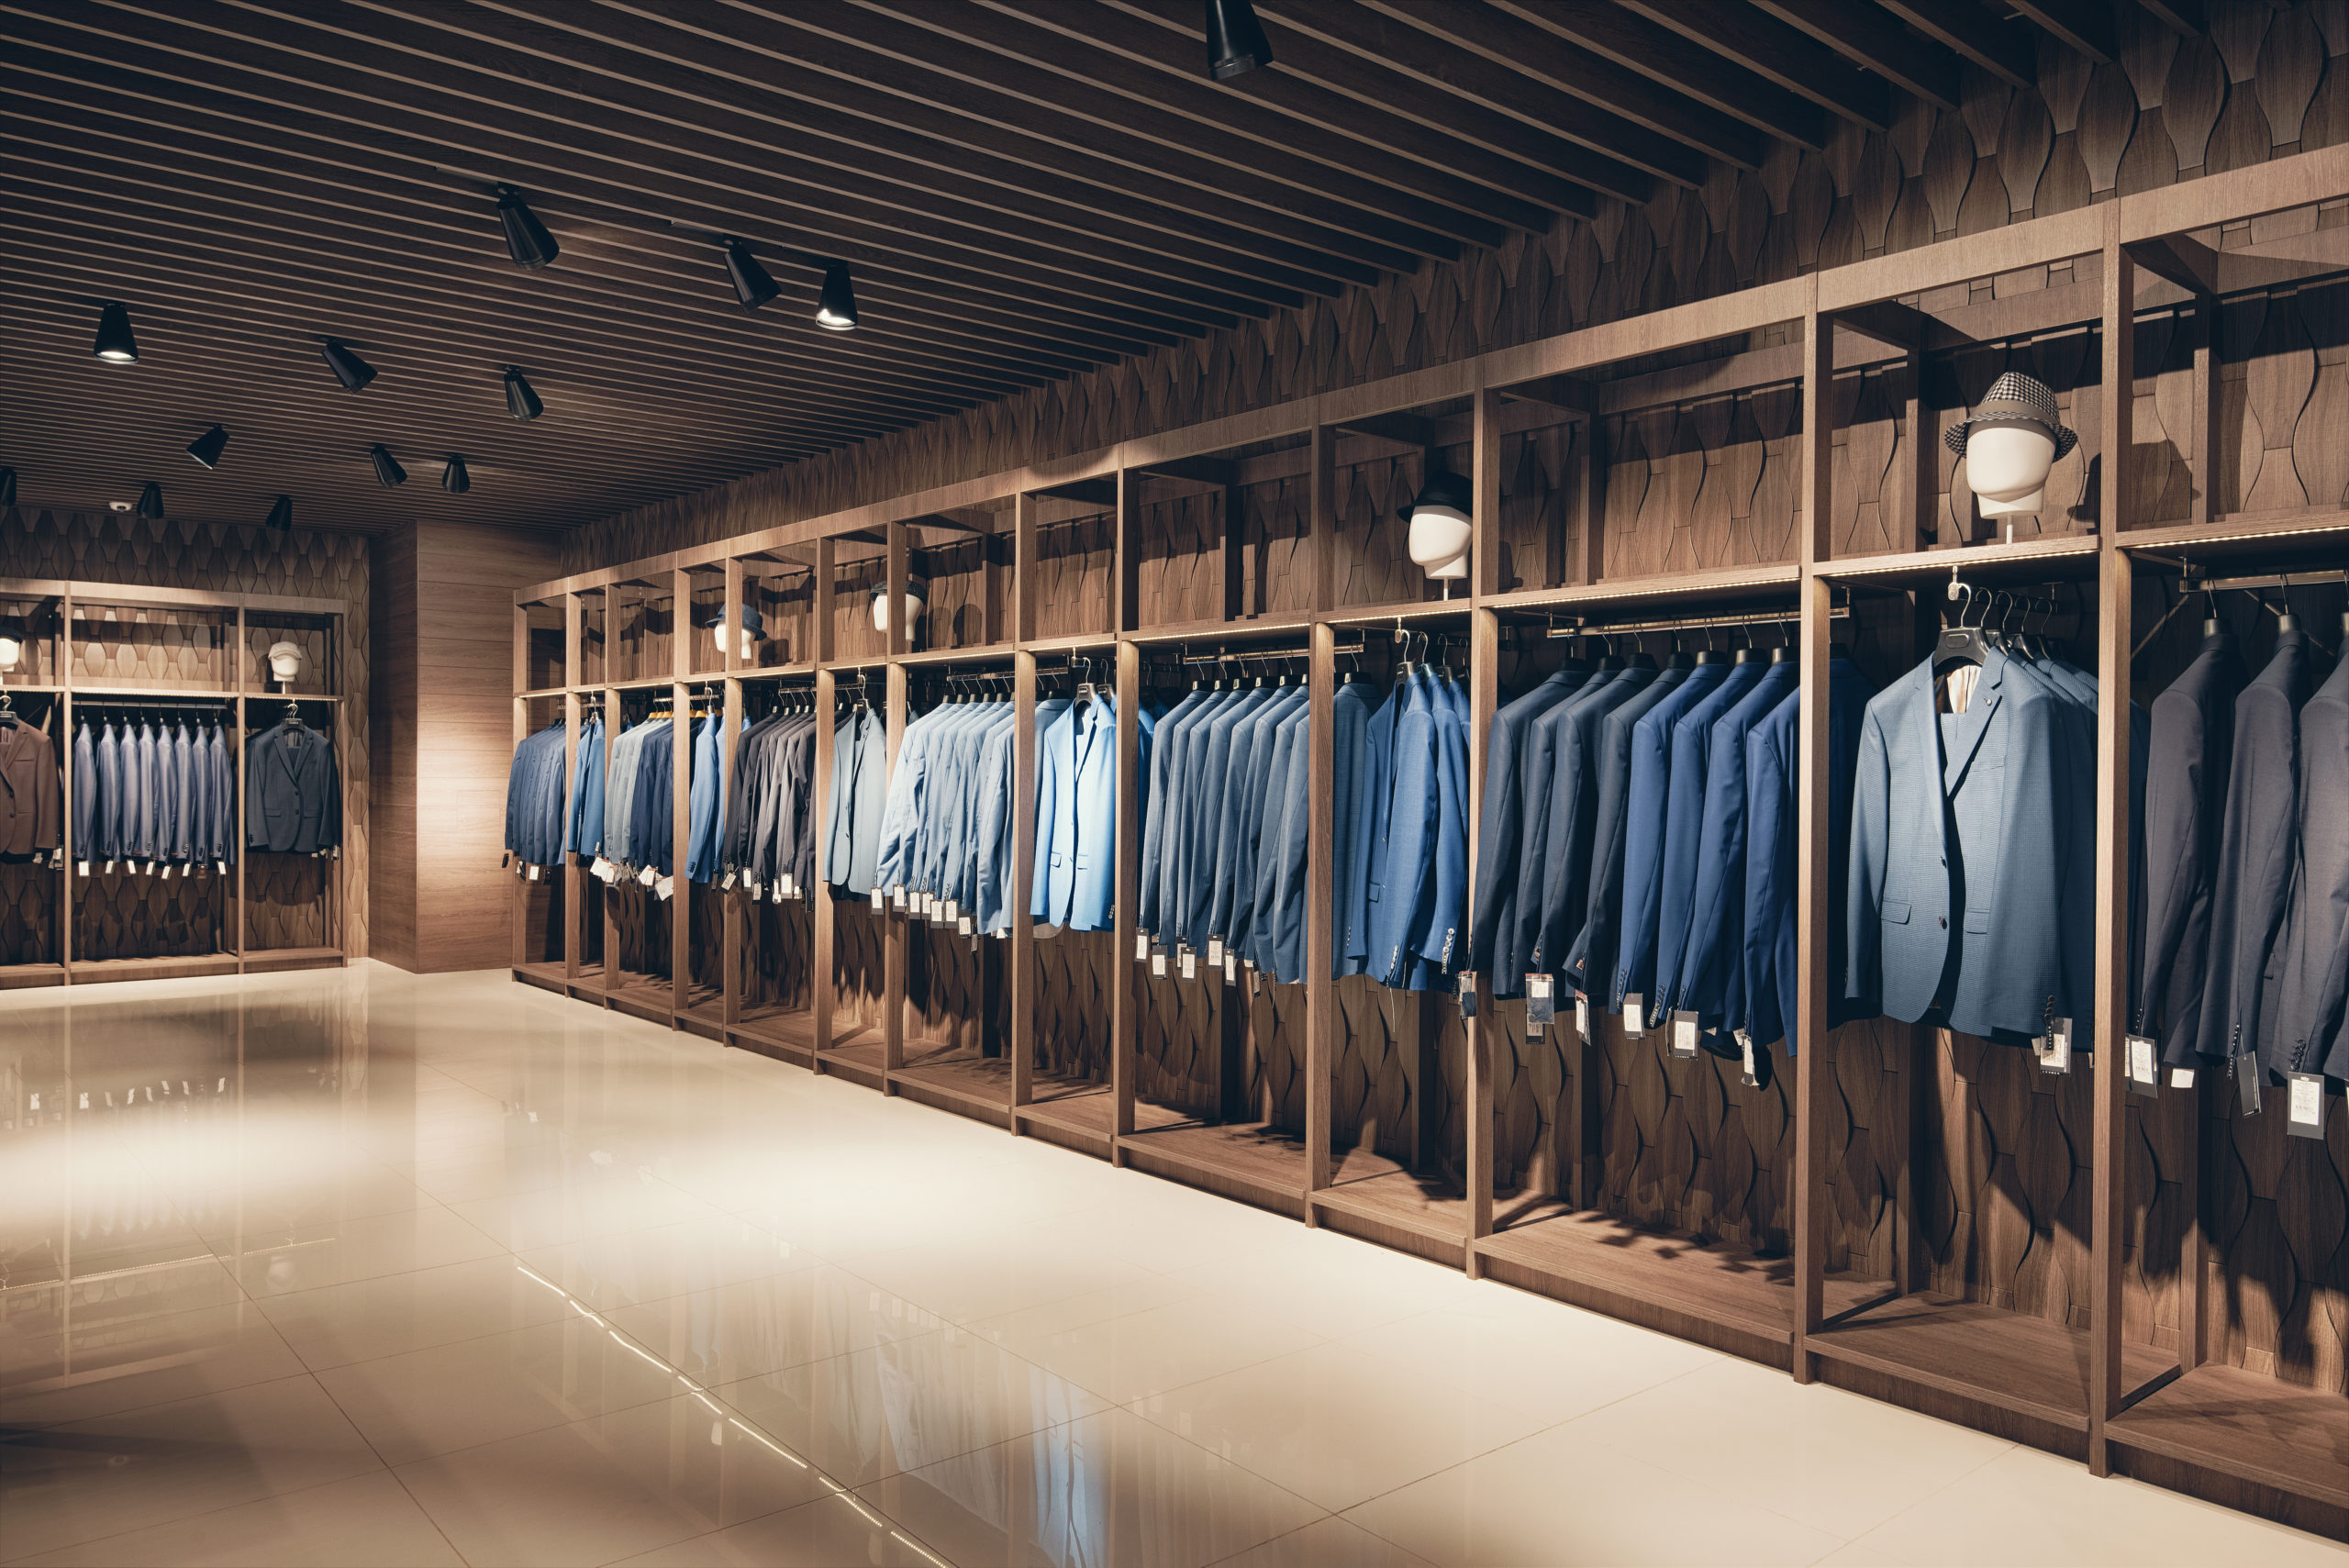 Interior of the business suit shop. Strict premium expensive suits hang in a row on hangers in large quantities